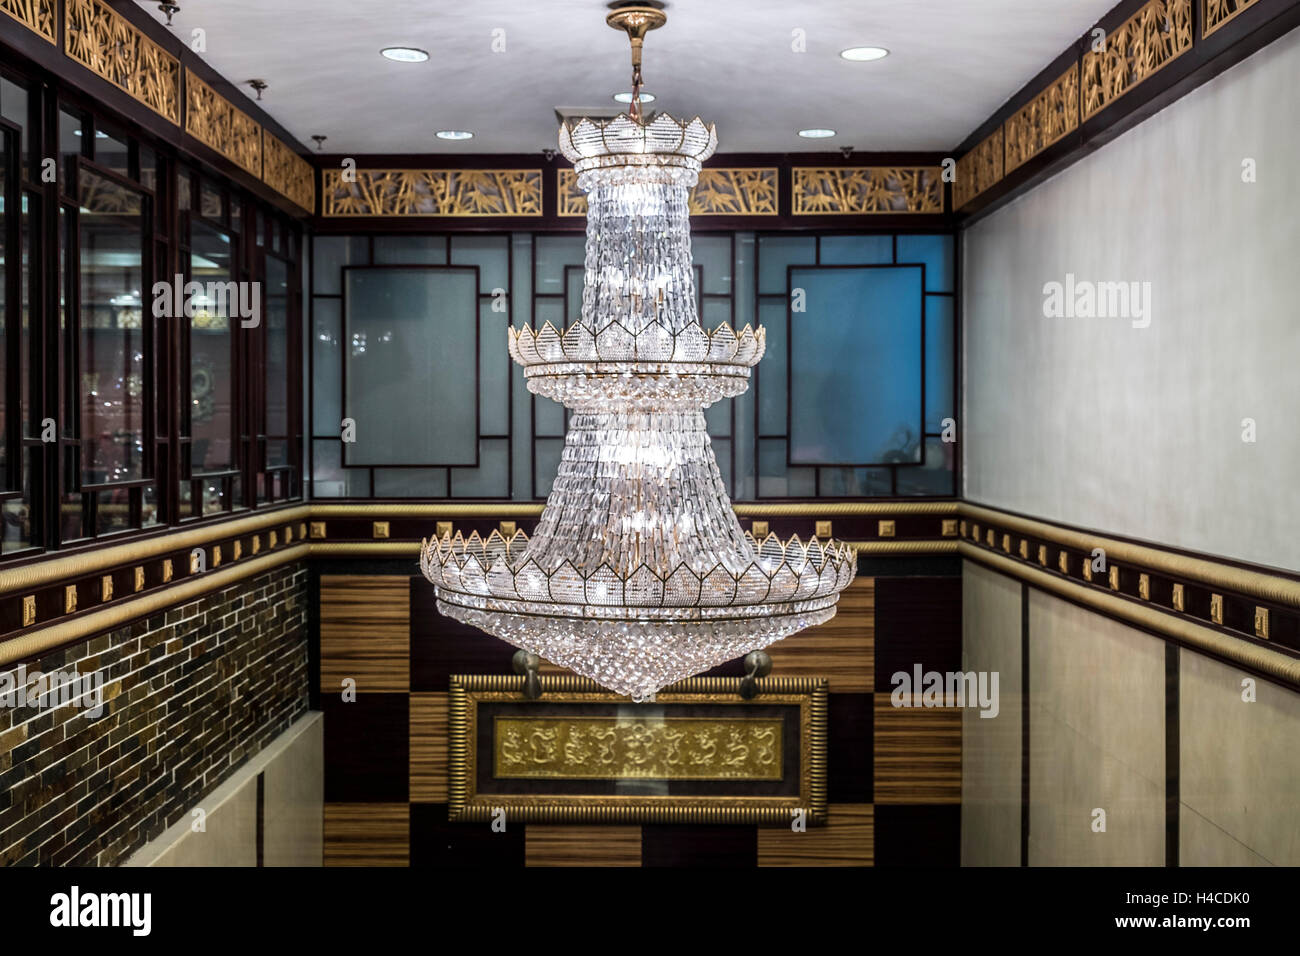 Chandelier in of a Chinese restaurant in New York Stock Photo